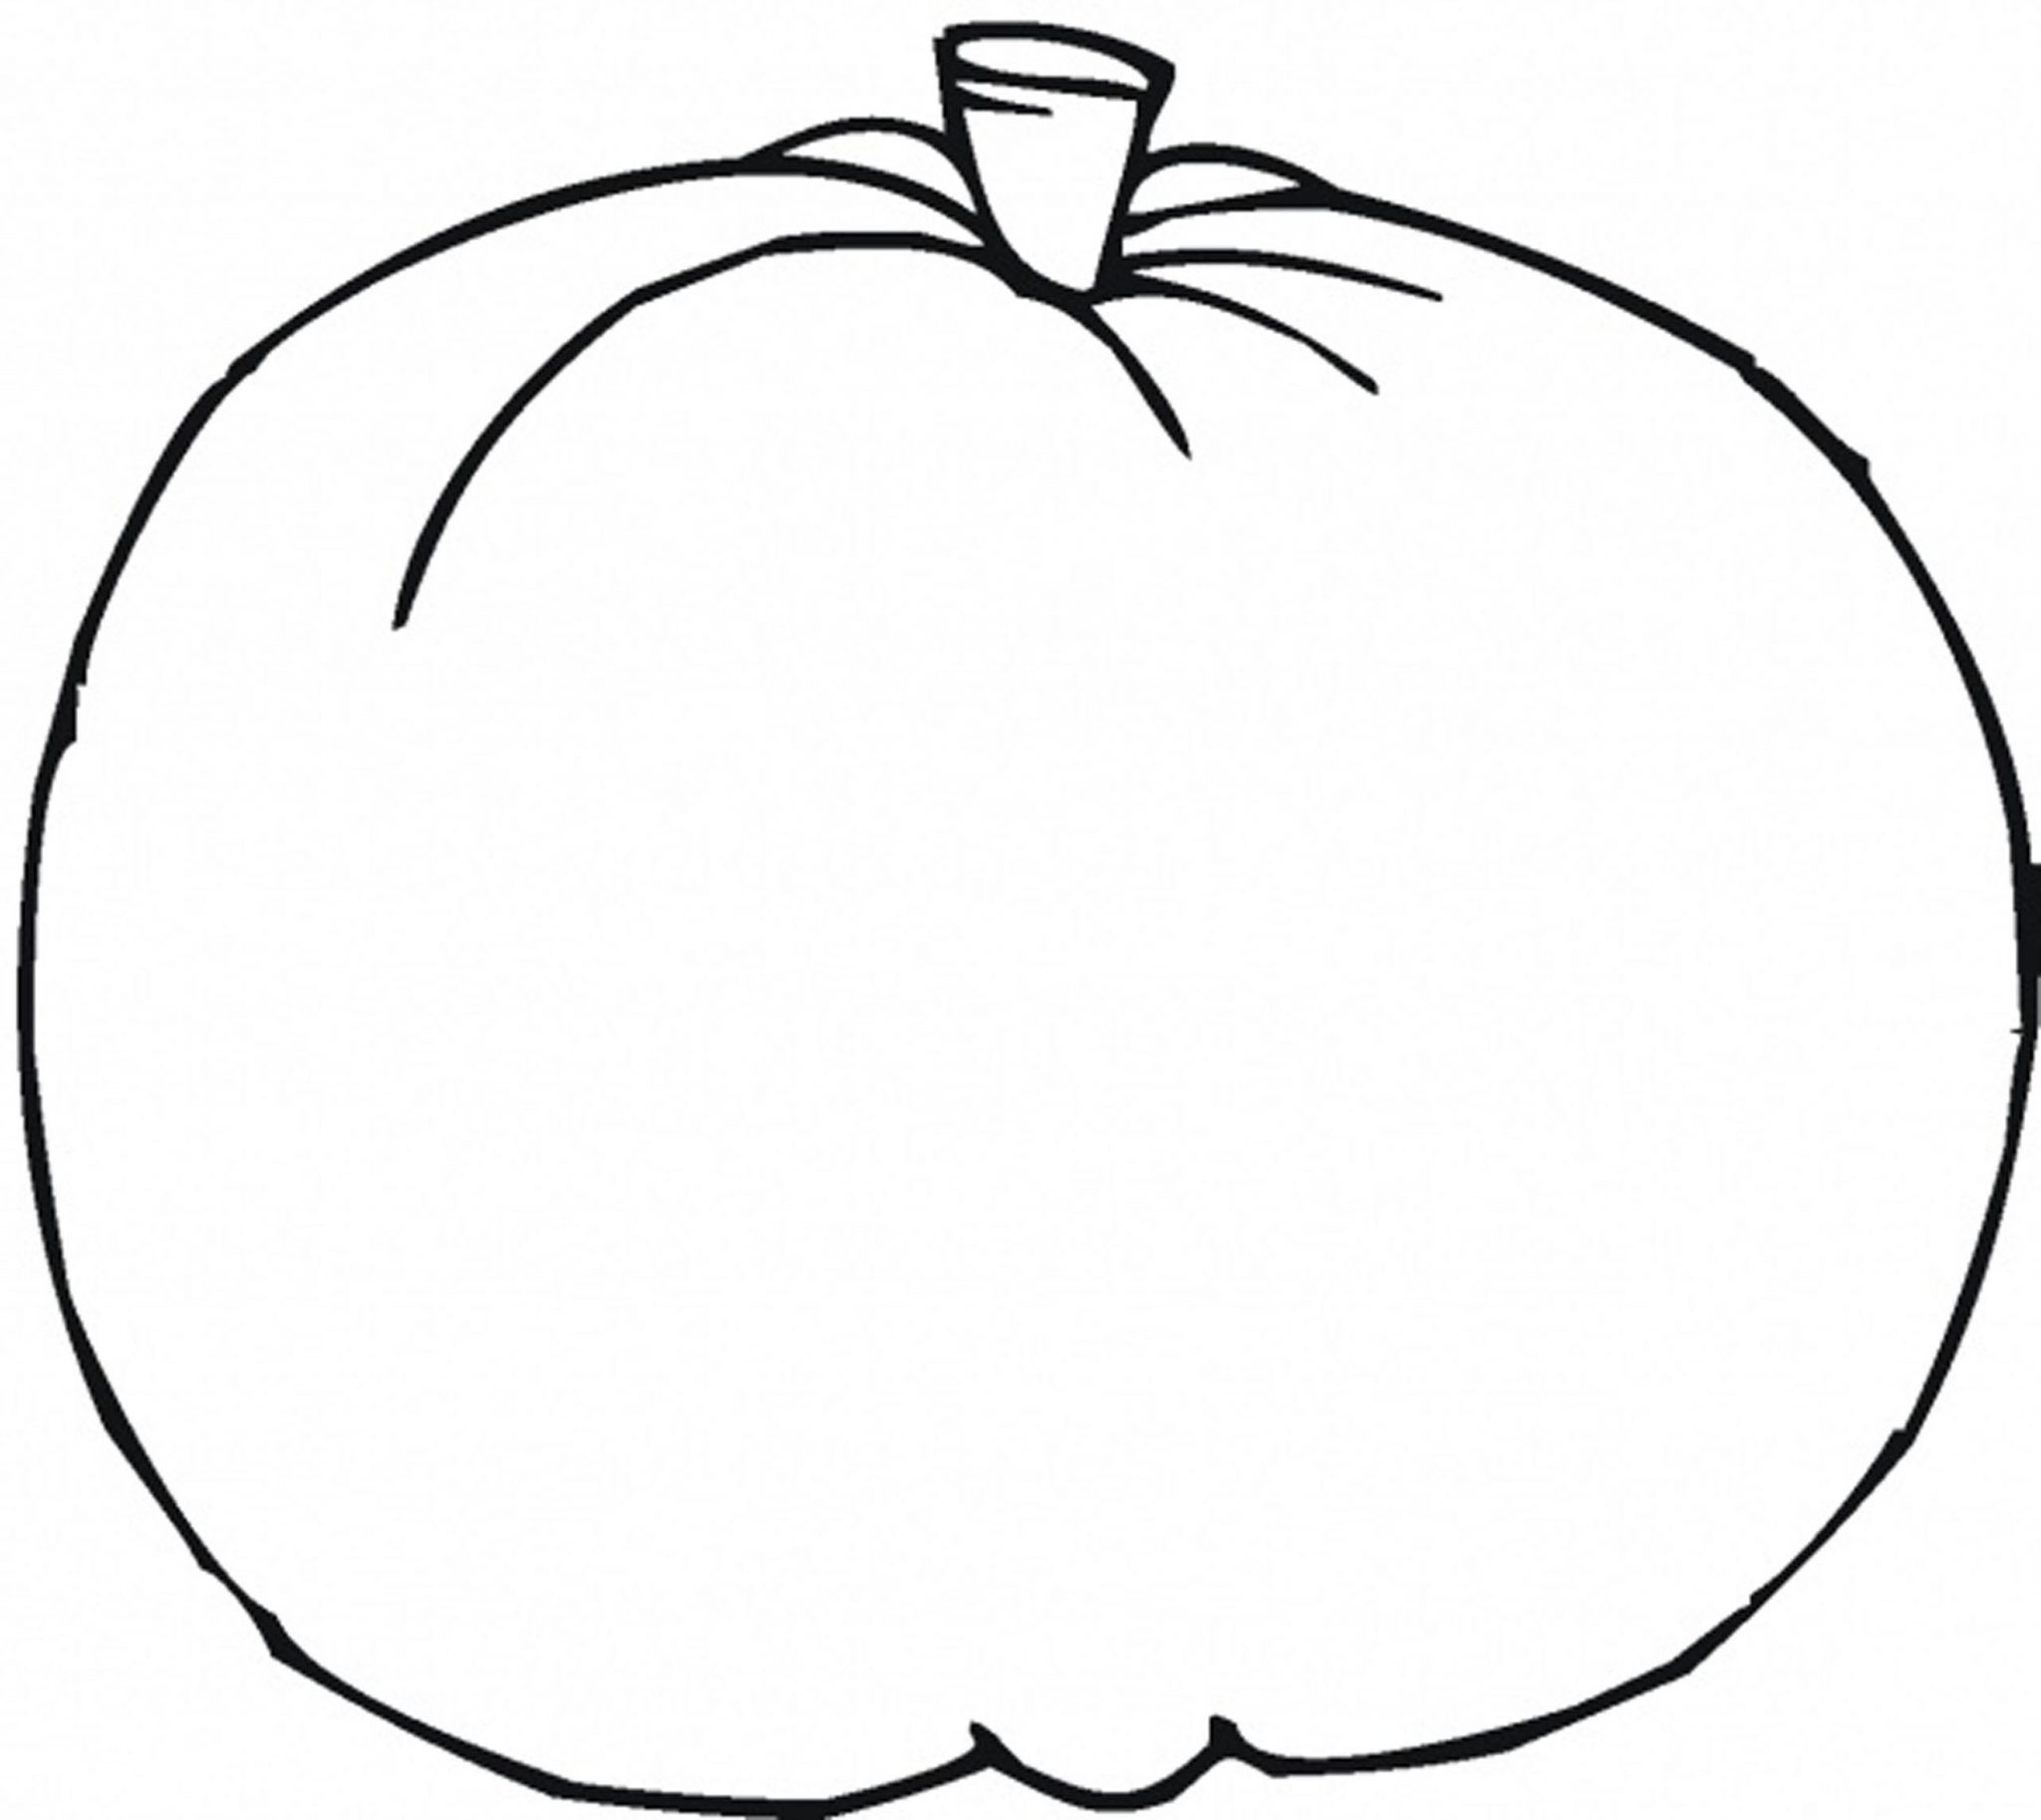 free pumpkin coloring pages for kids